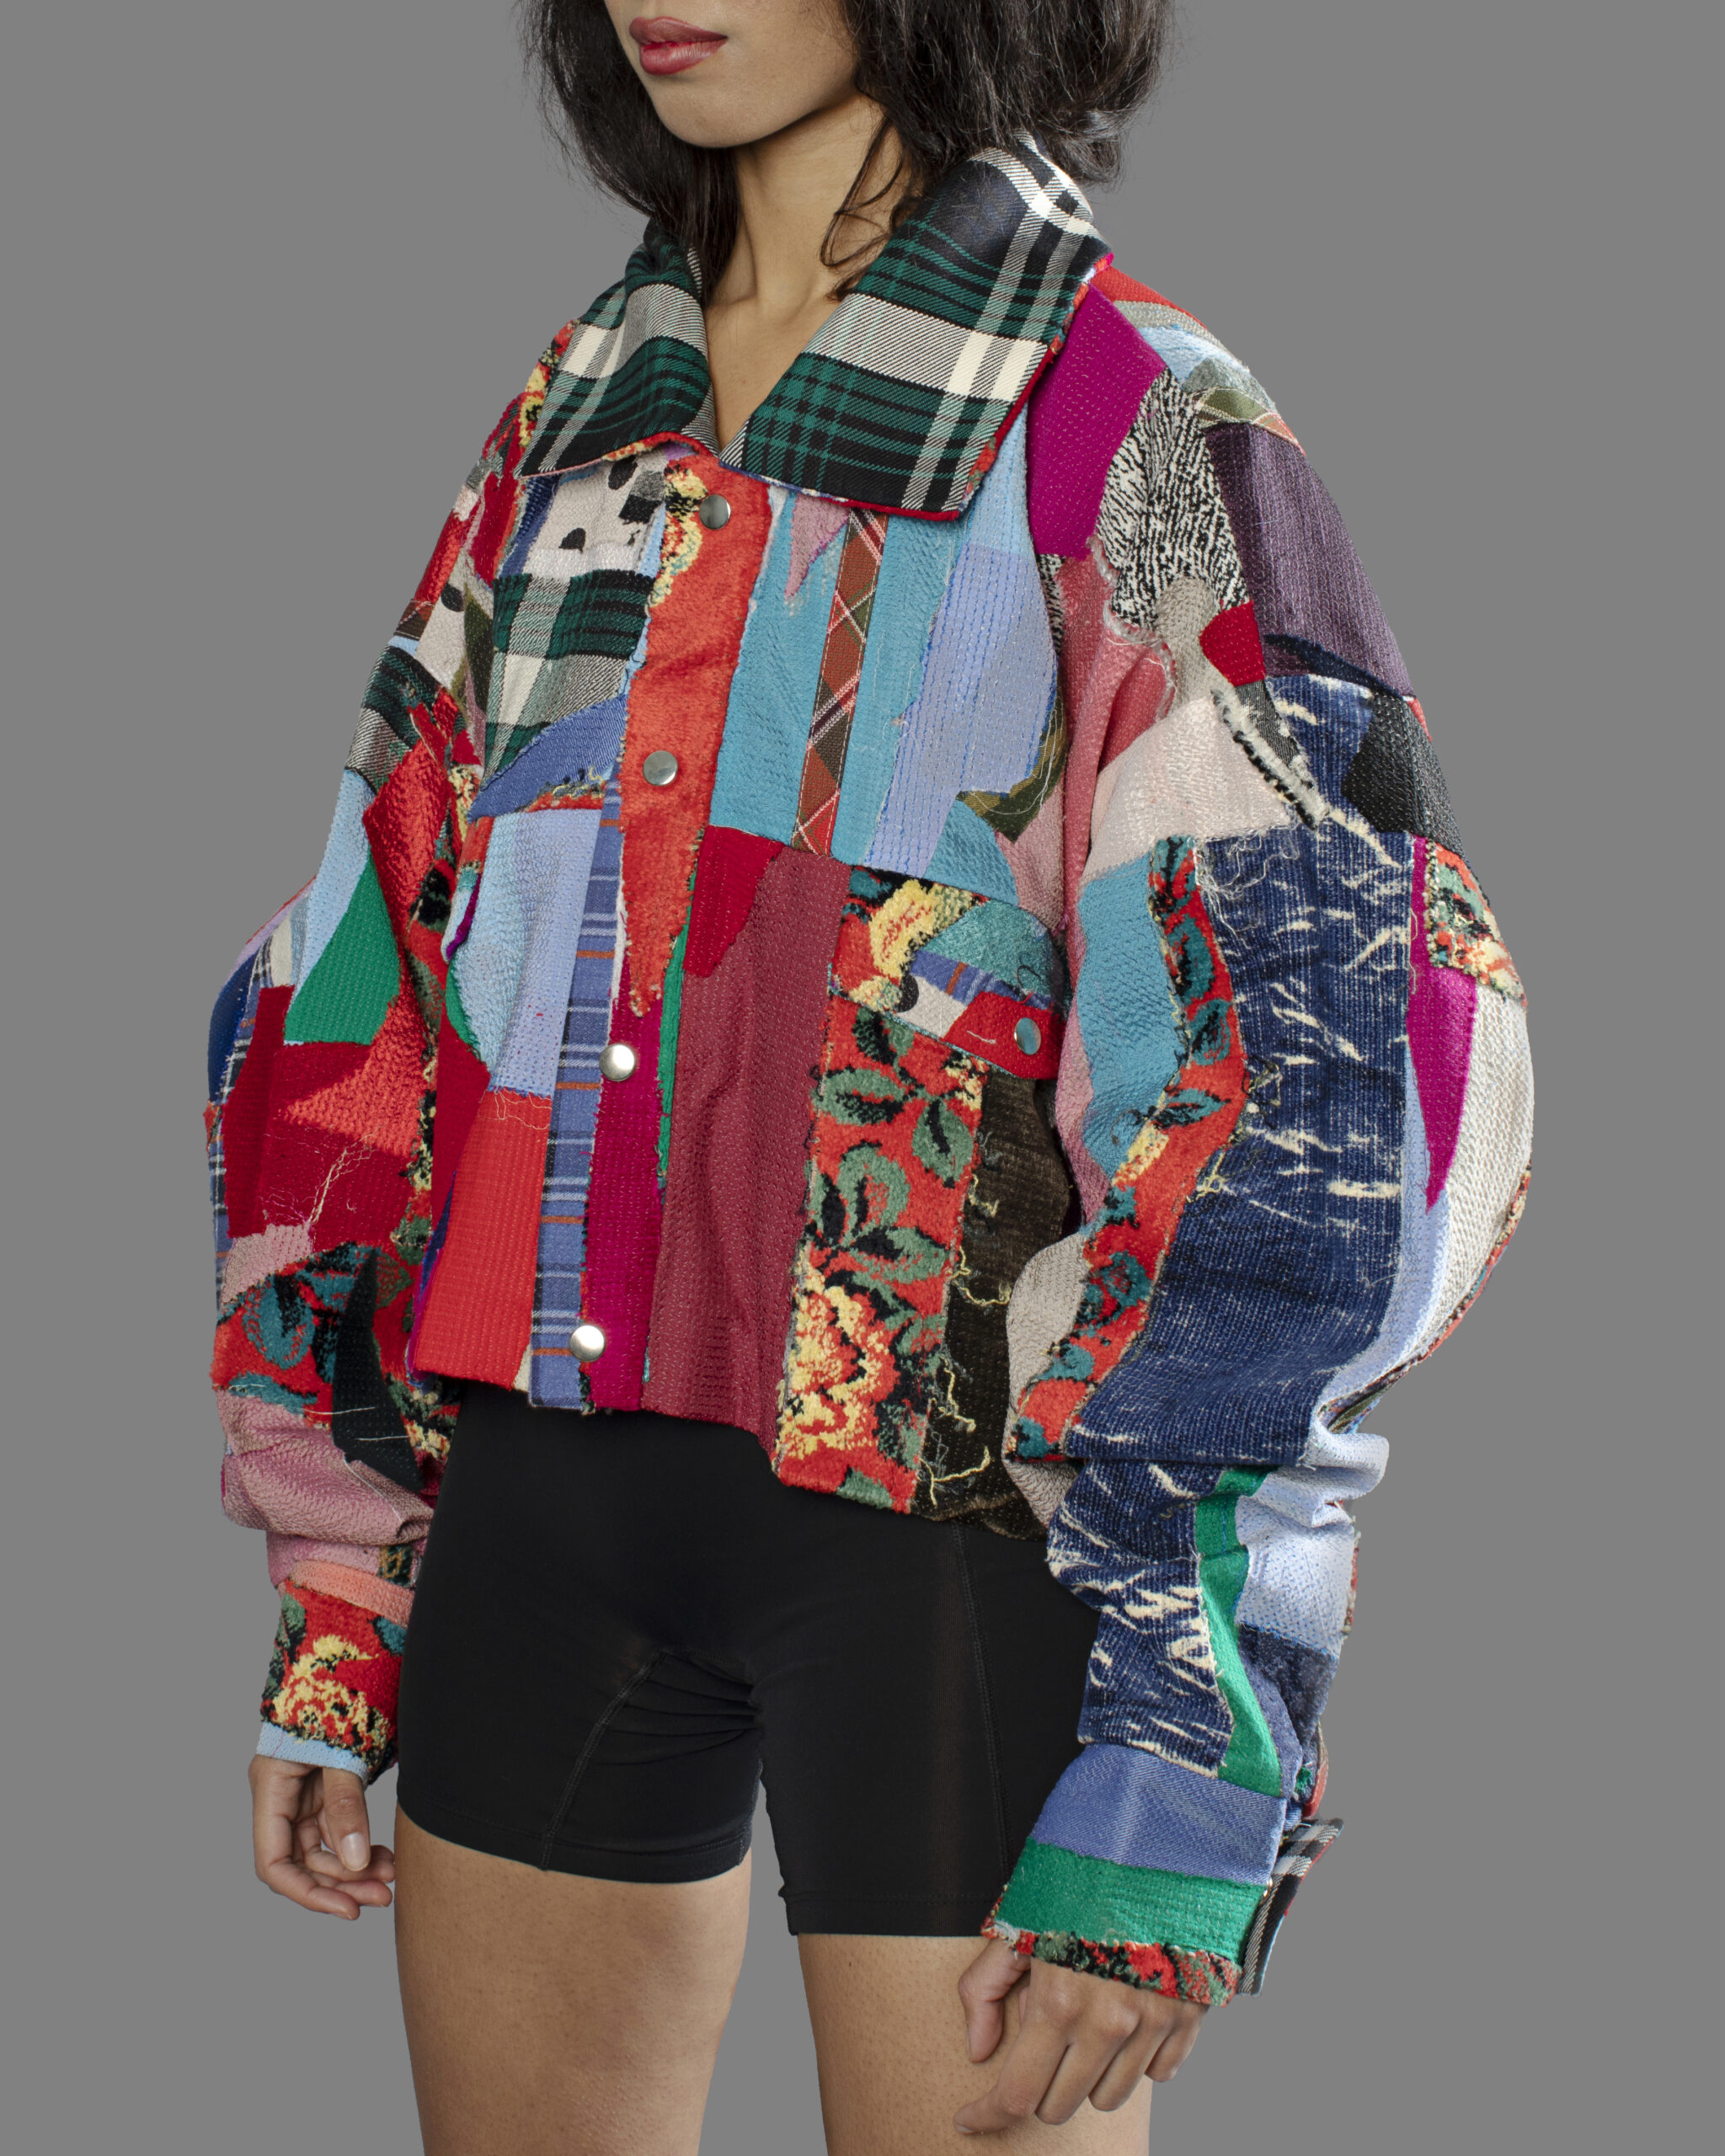 This is an image of a scrap jacket from the brand MiJA. It consists of different colors and materials.